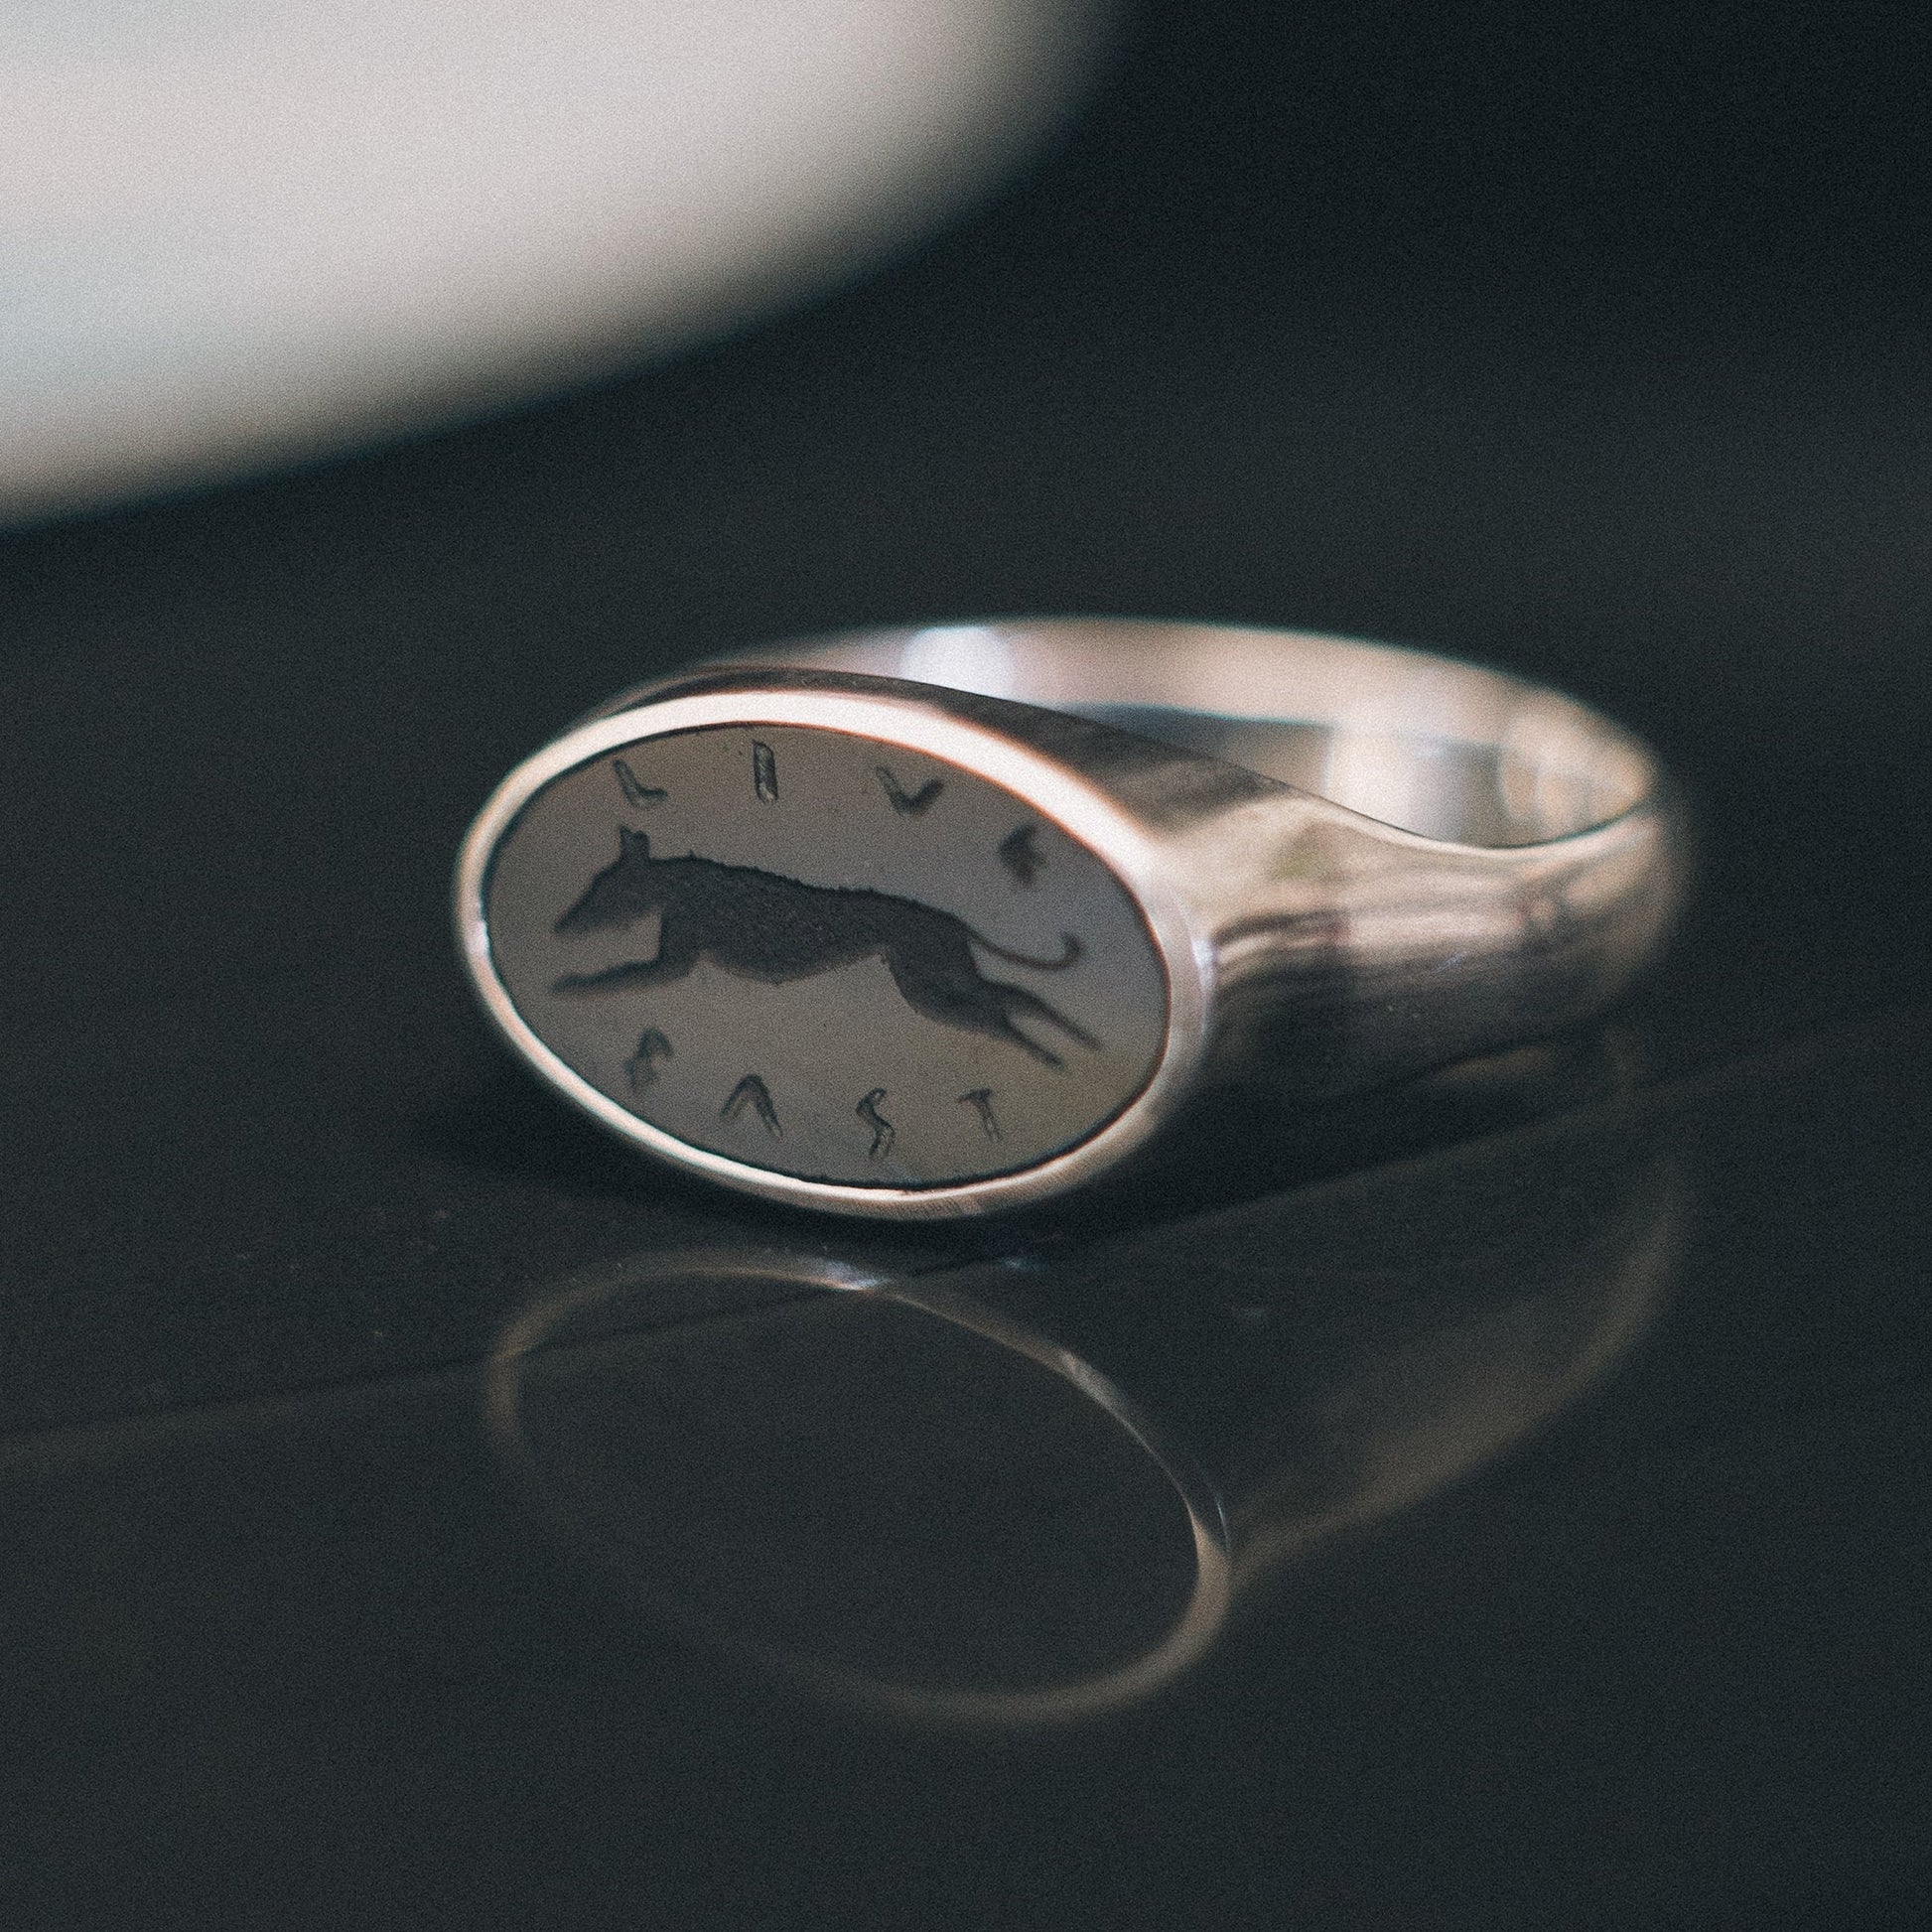 Silver Signet Ring With Greyhound Engraving On A Black Onyx Stone